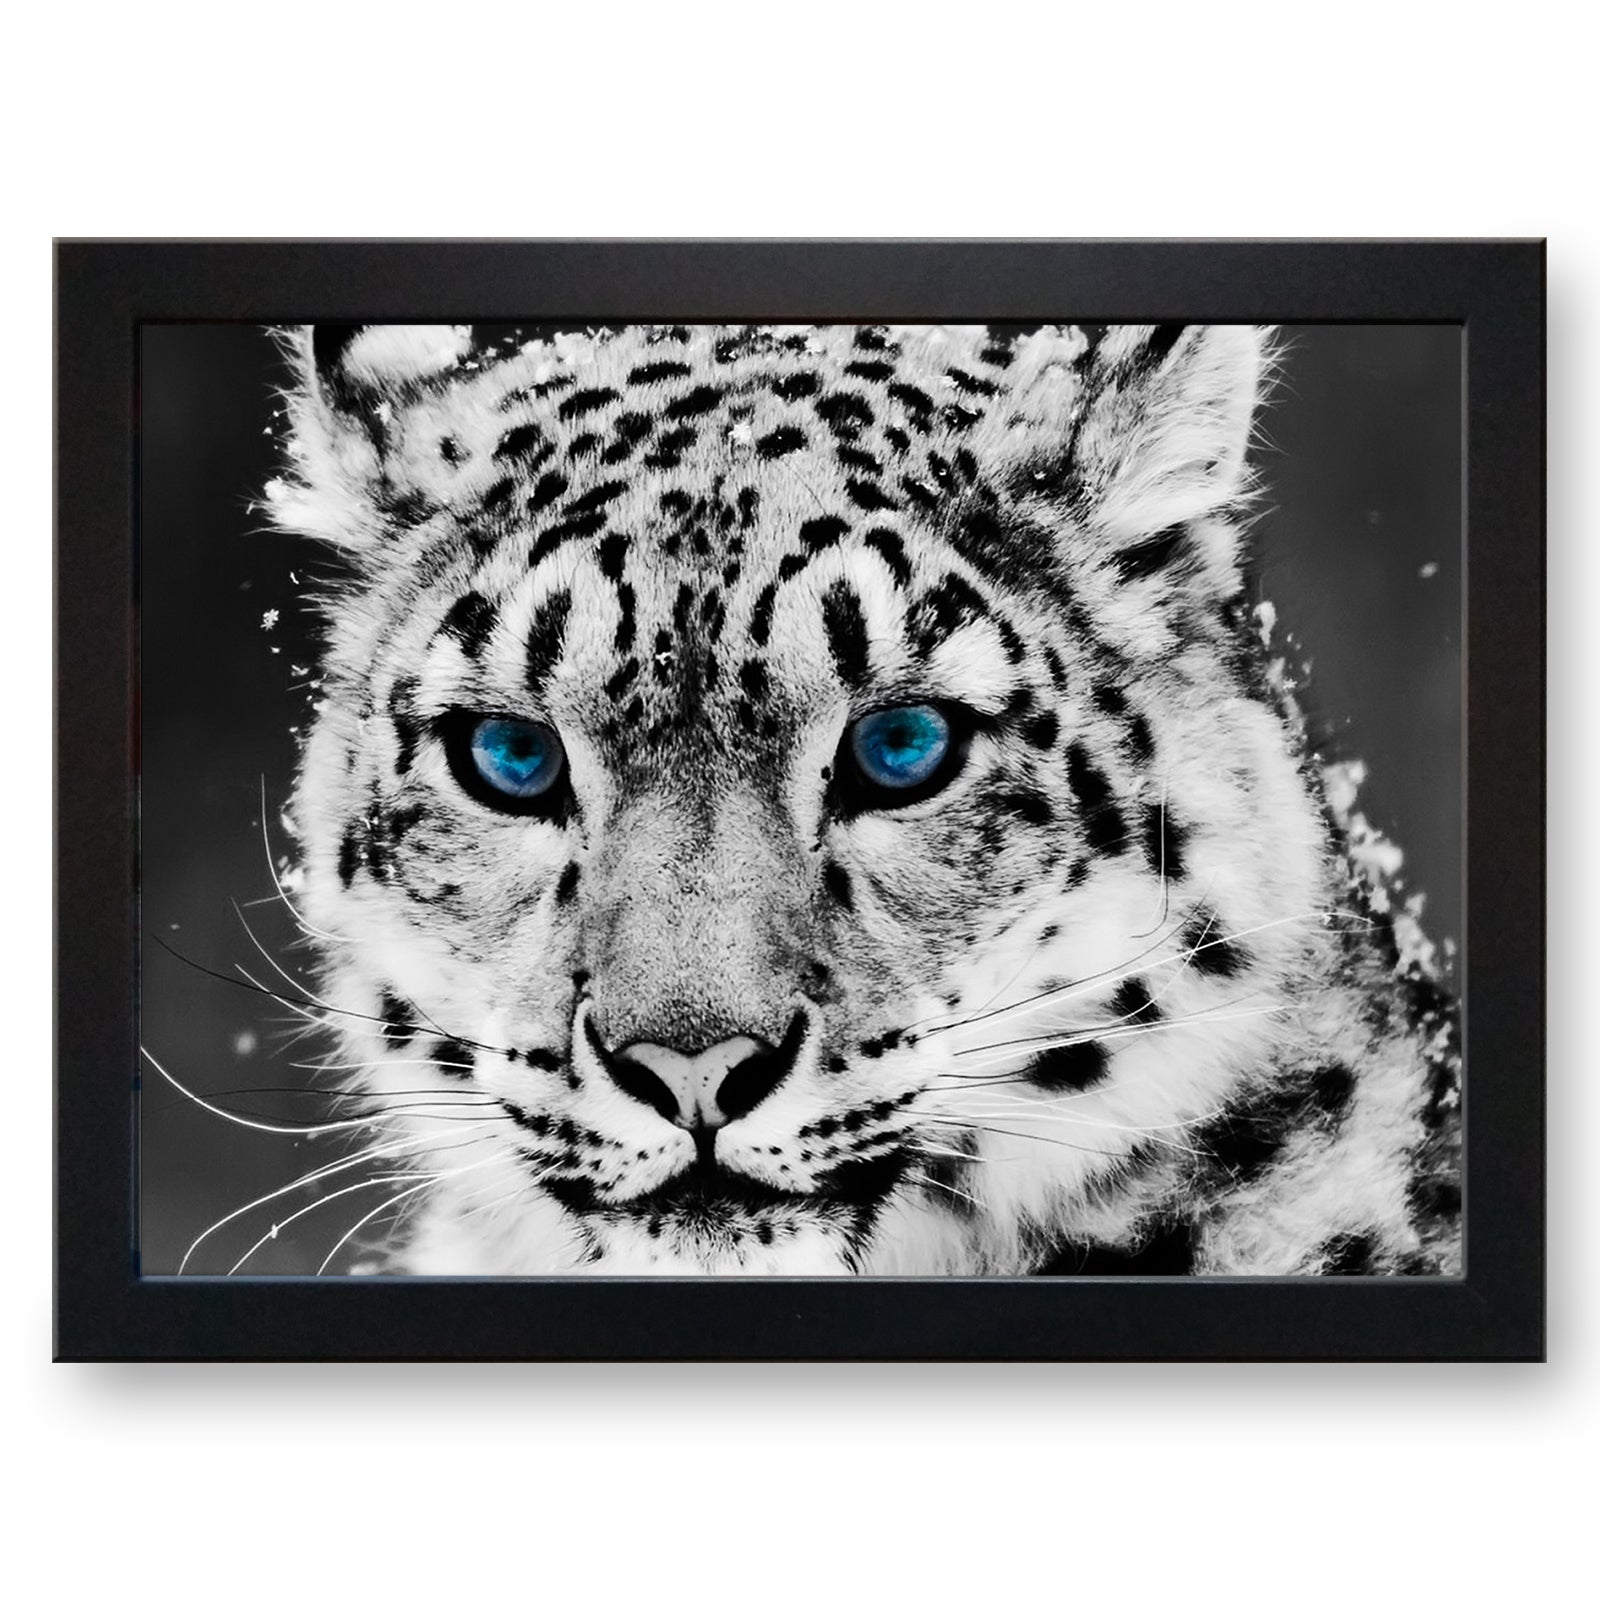 Snow Leopard Cushioned Lap Tray - my personalised lap tray | mooki   -   